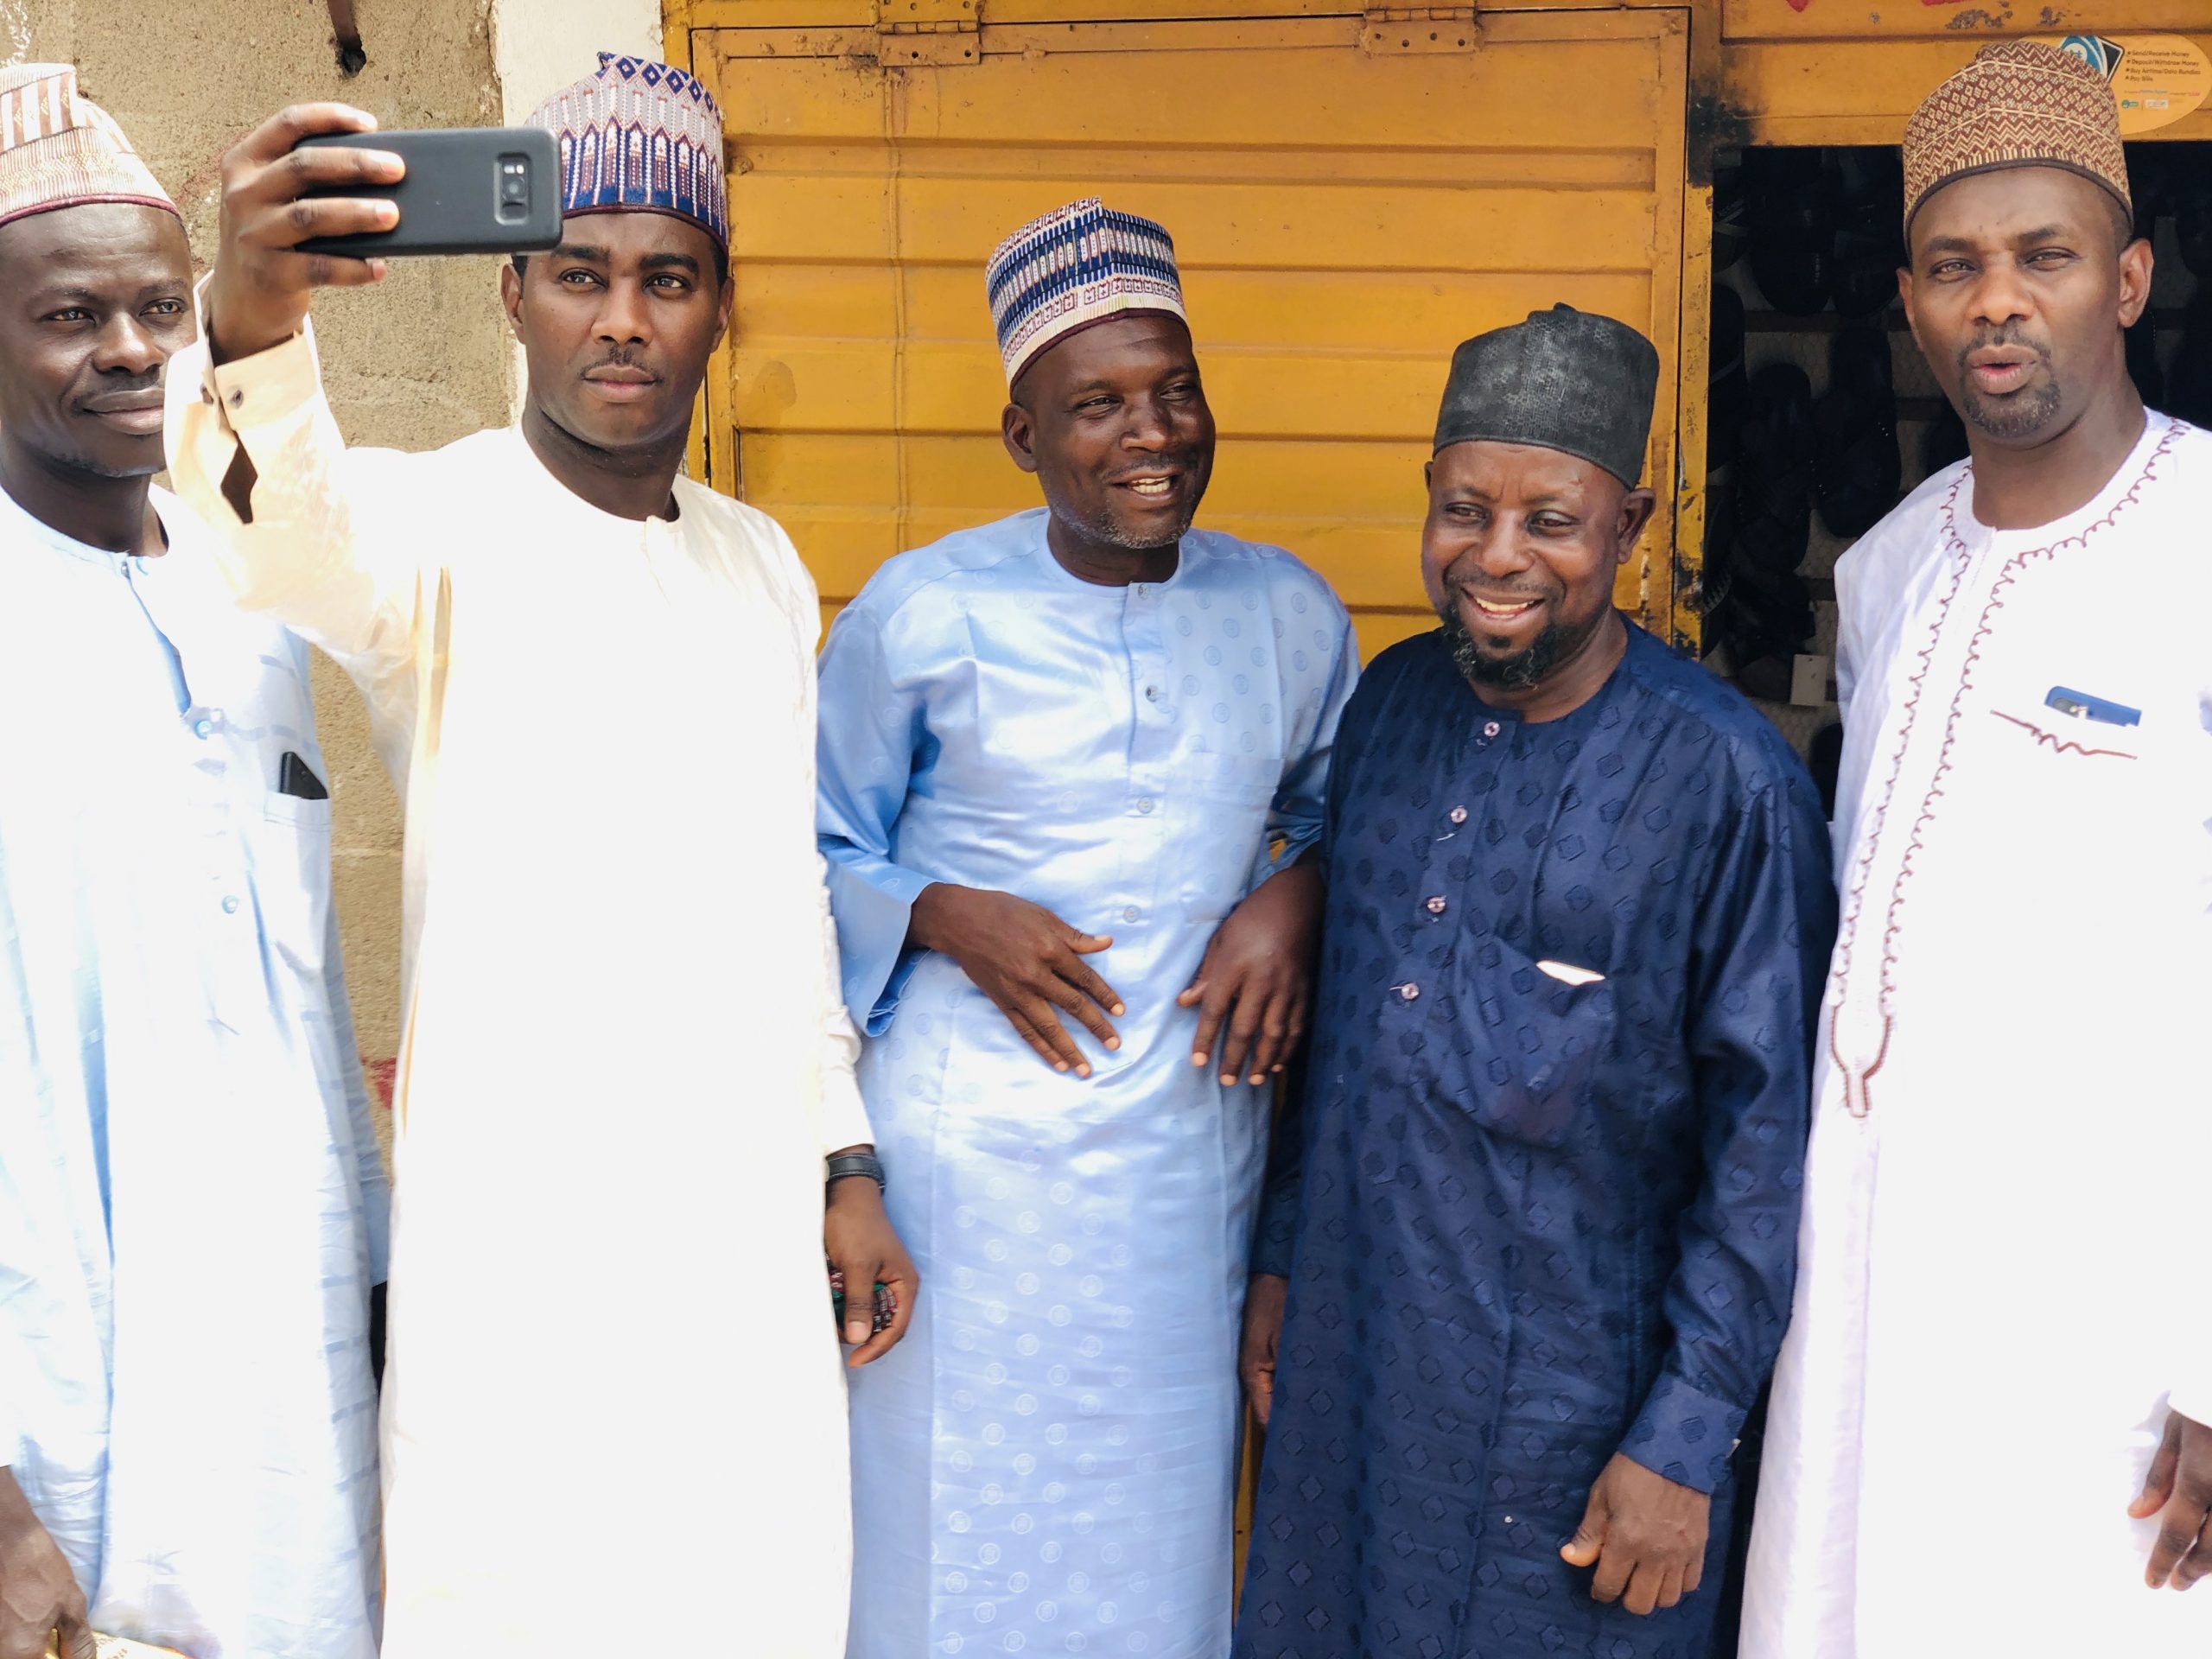 Dr. Mustapha H. Kurfi (on the right) with friends and siblings, and a groom taking a selfie.